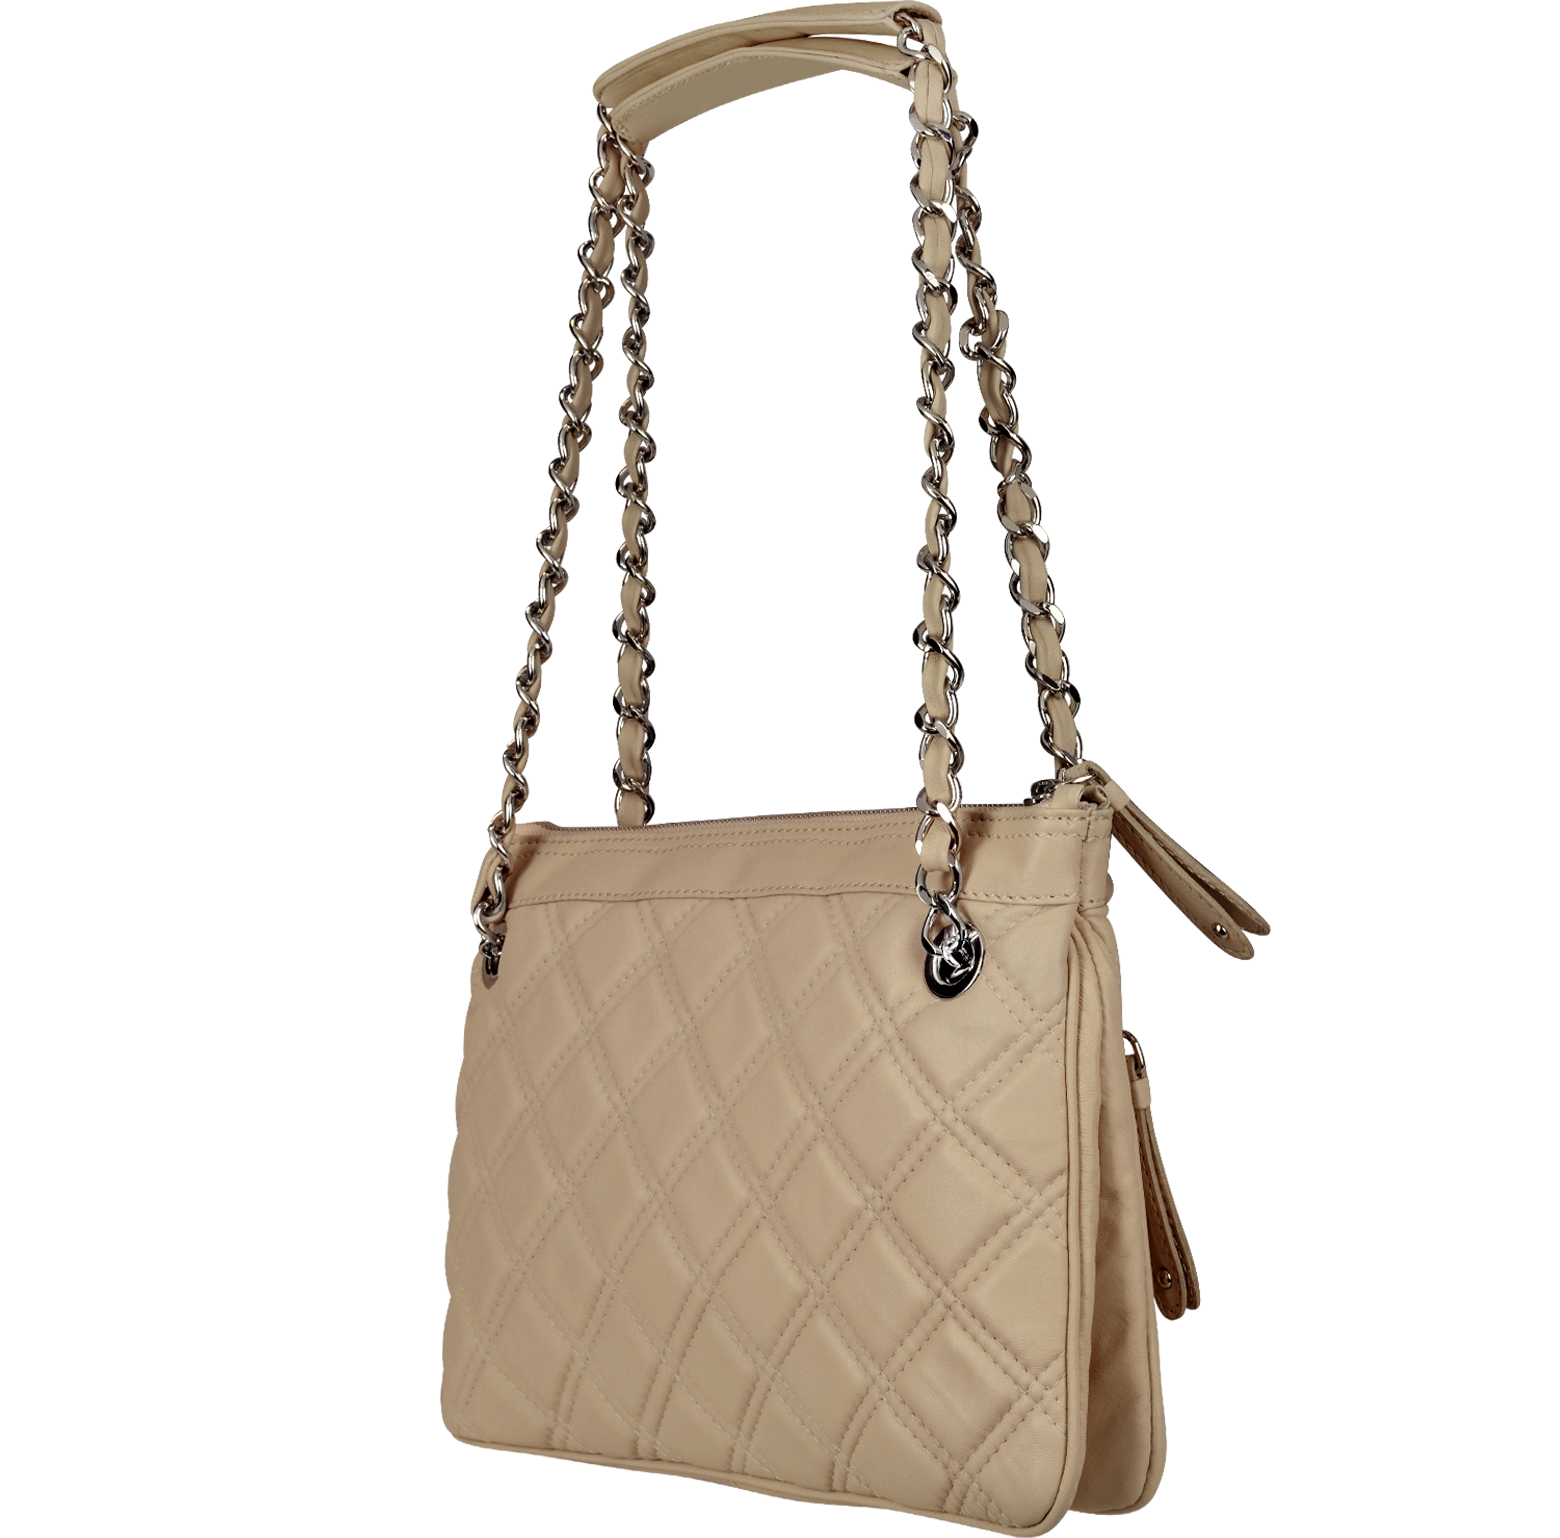 Buti Beige Quilted Leather Shoulder Bag at FORZIERI